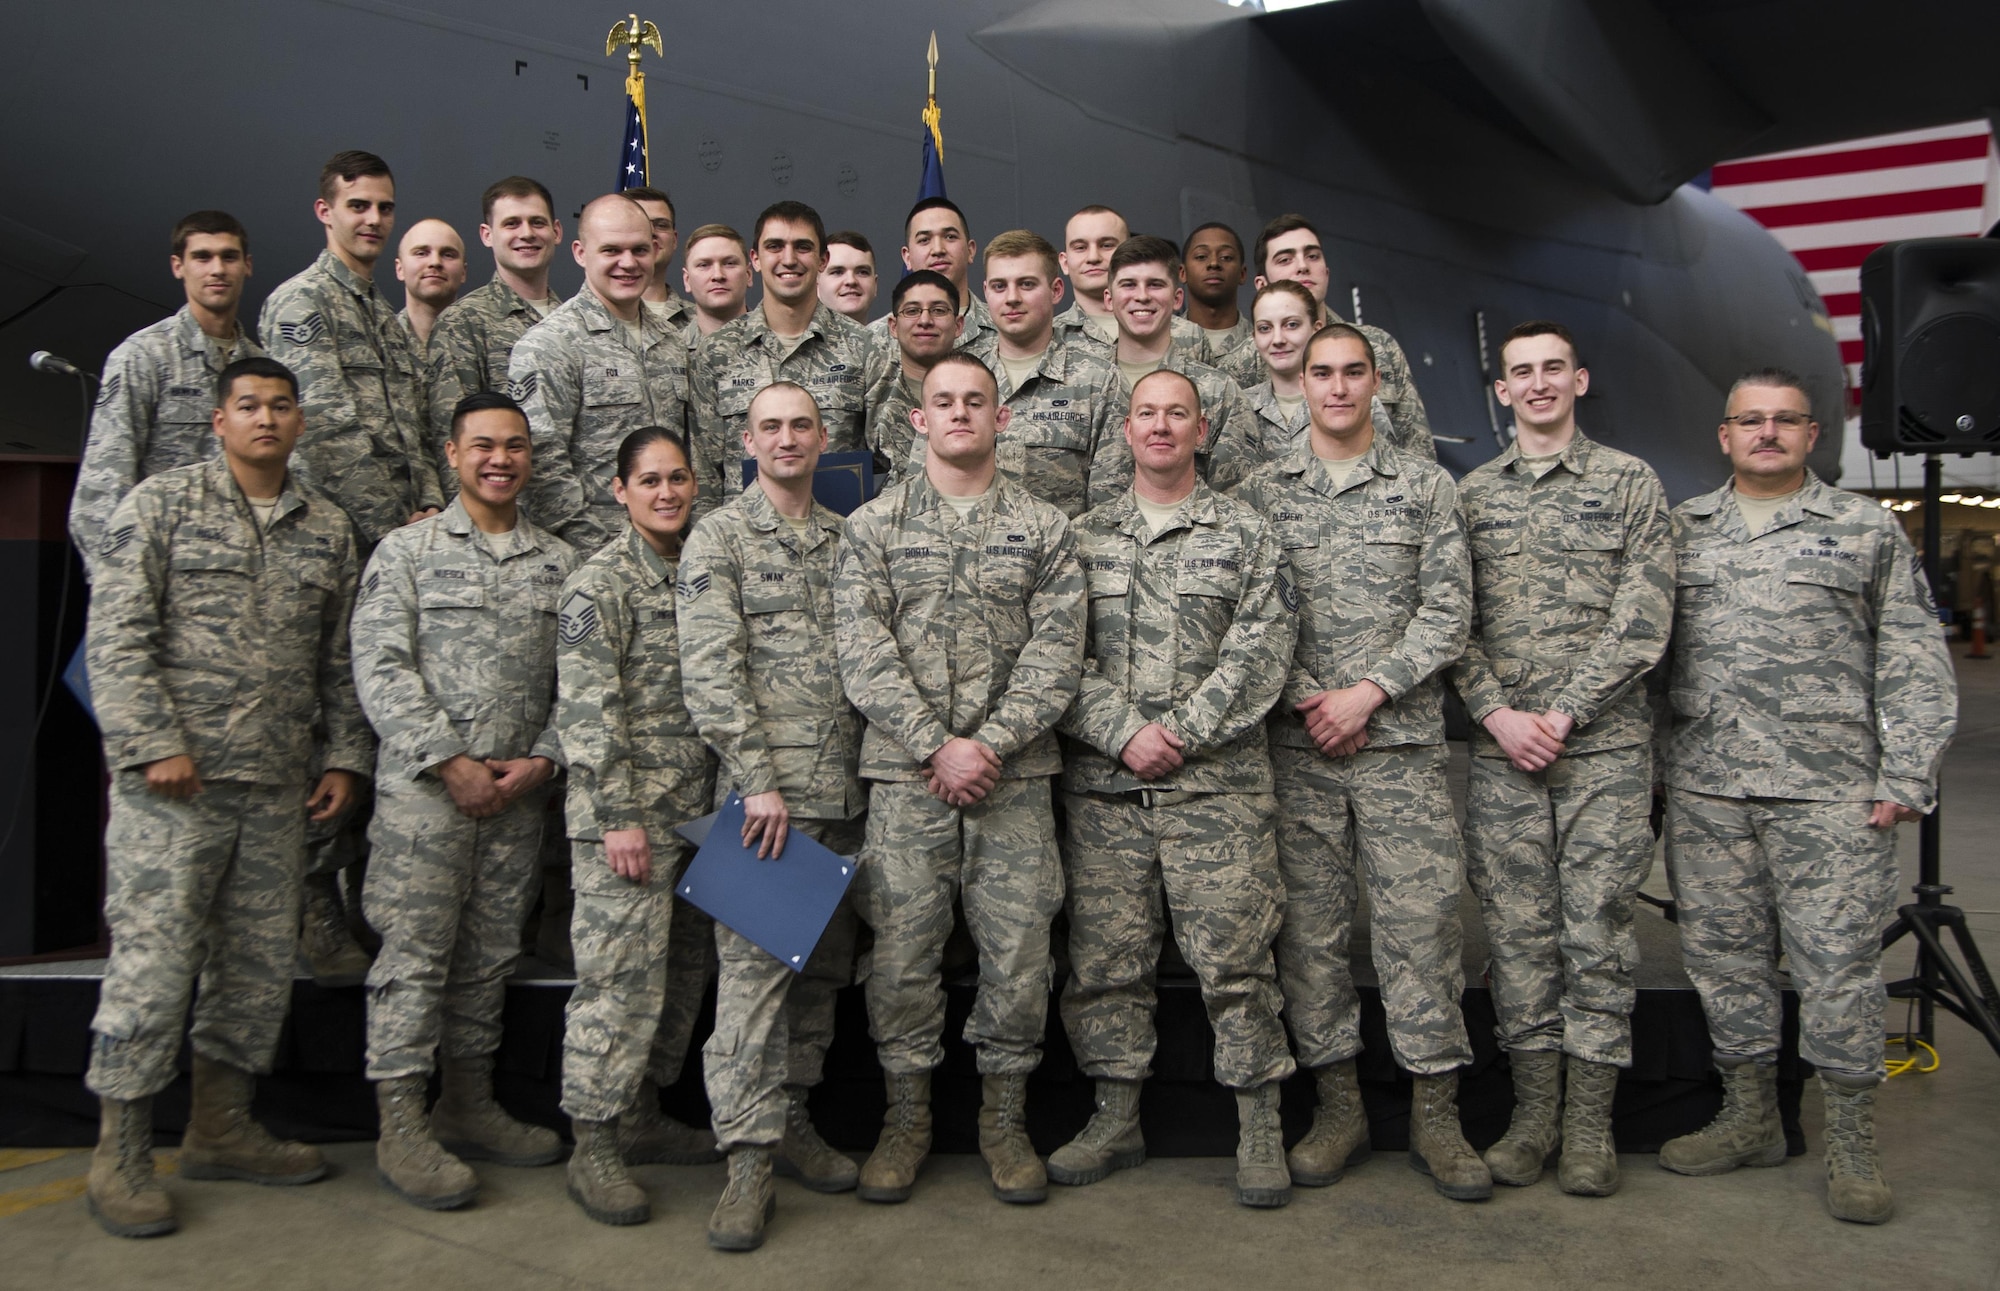 Assistant crew chiefs, dedicated crew chiefs and flying crew chiefs newest member pose for the camera after the recognition ceremony on March 9, 2017 at Joint Base Elmendorf-Richardson, Alaska 